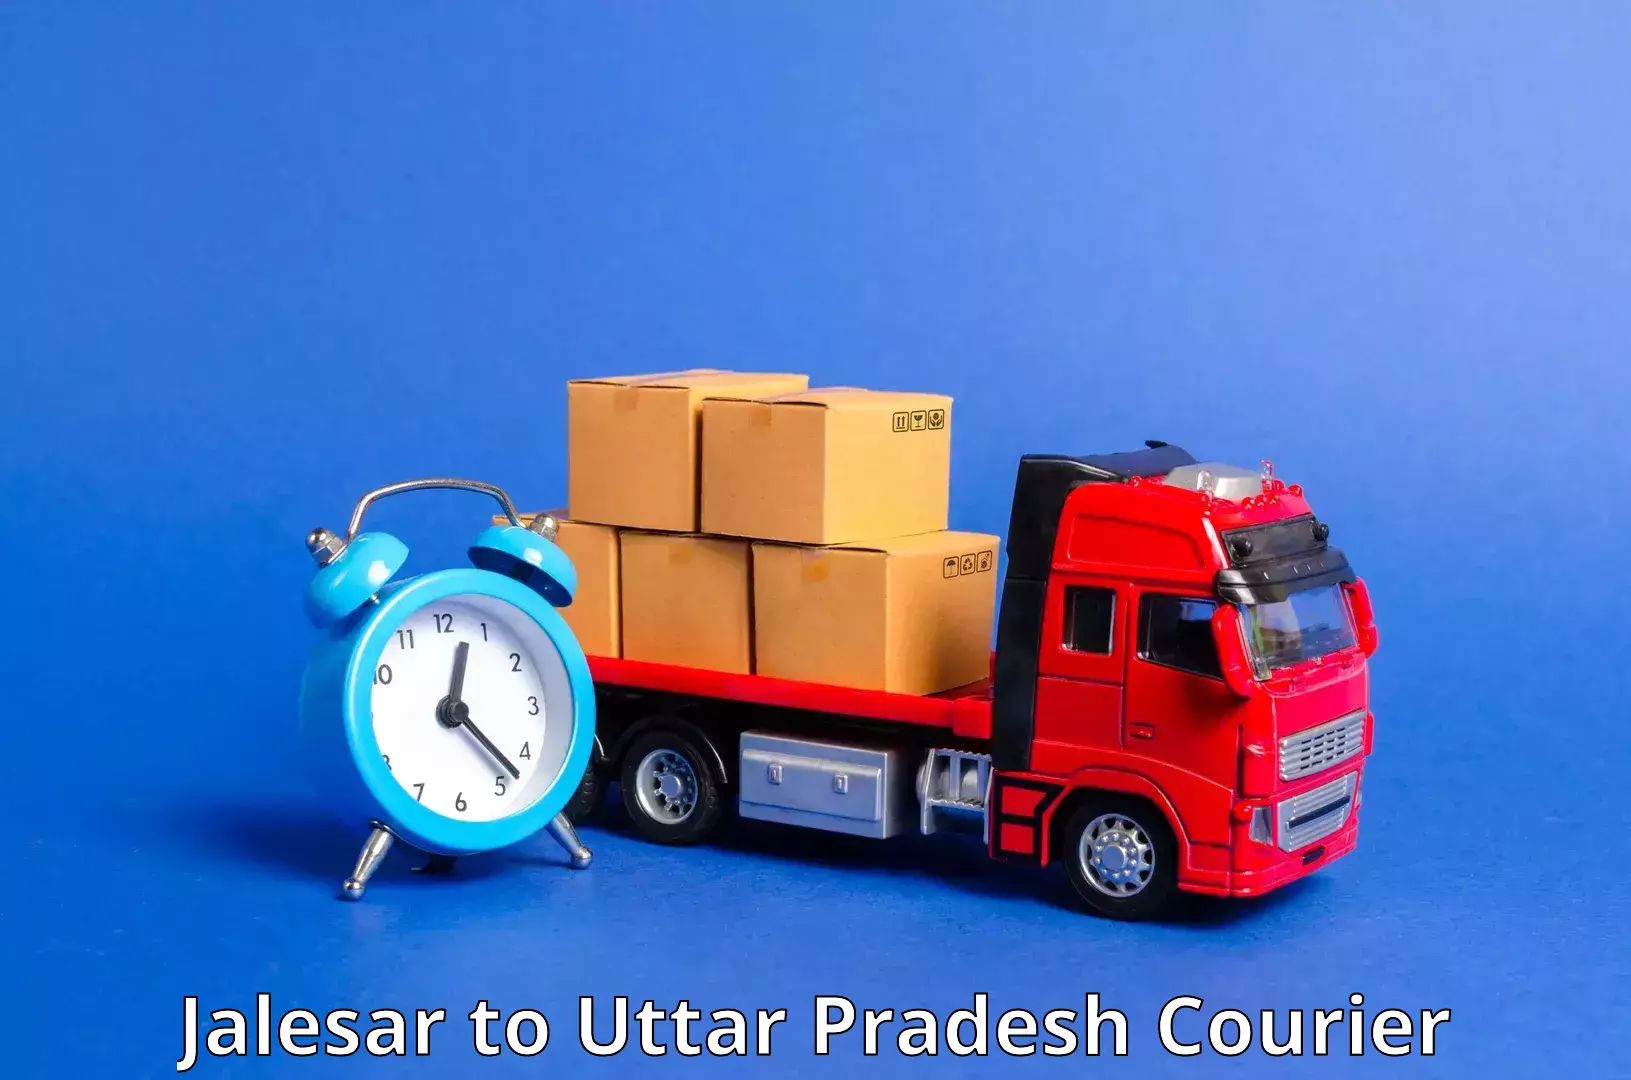 State-of-the-art courier technology Jalesar to Moradabad